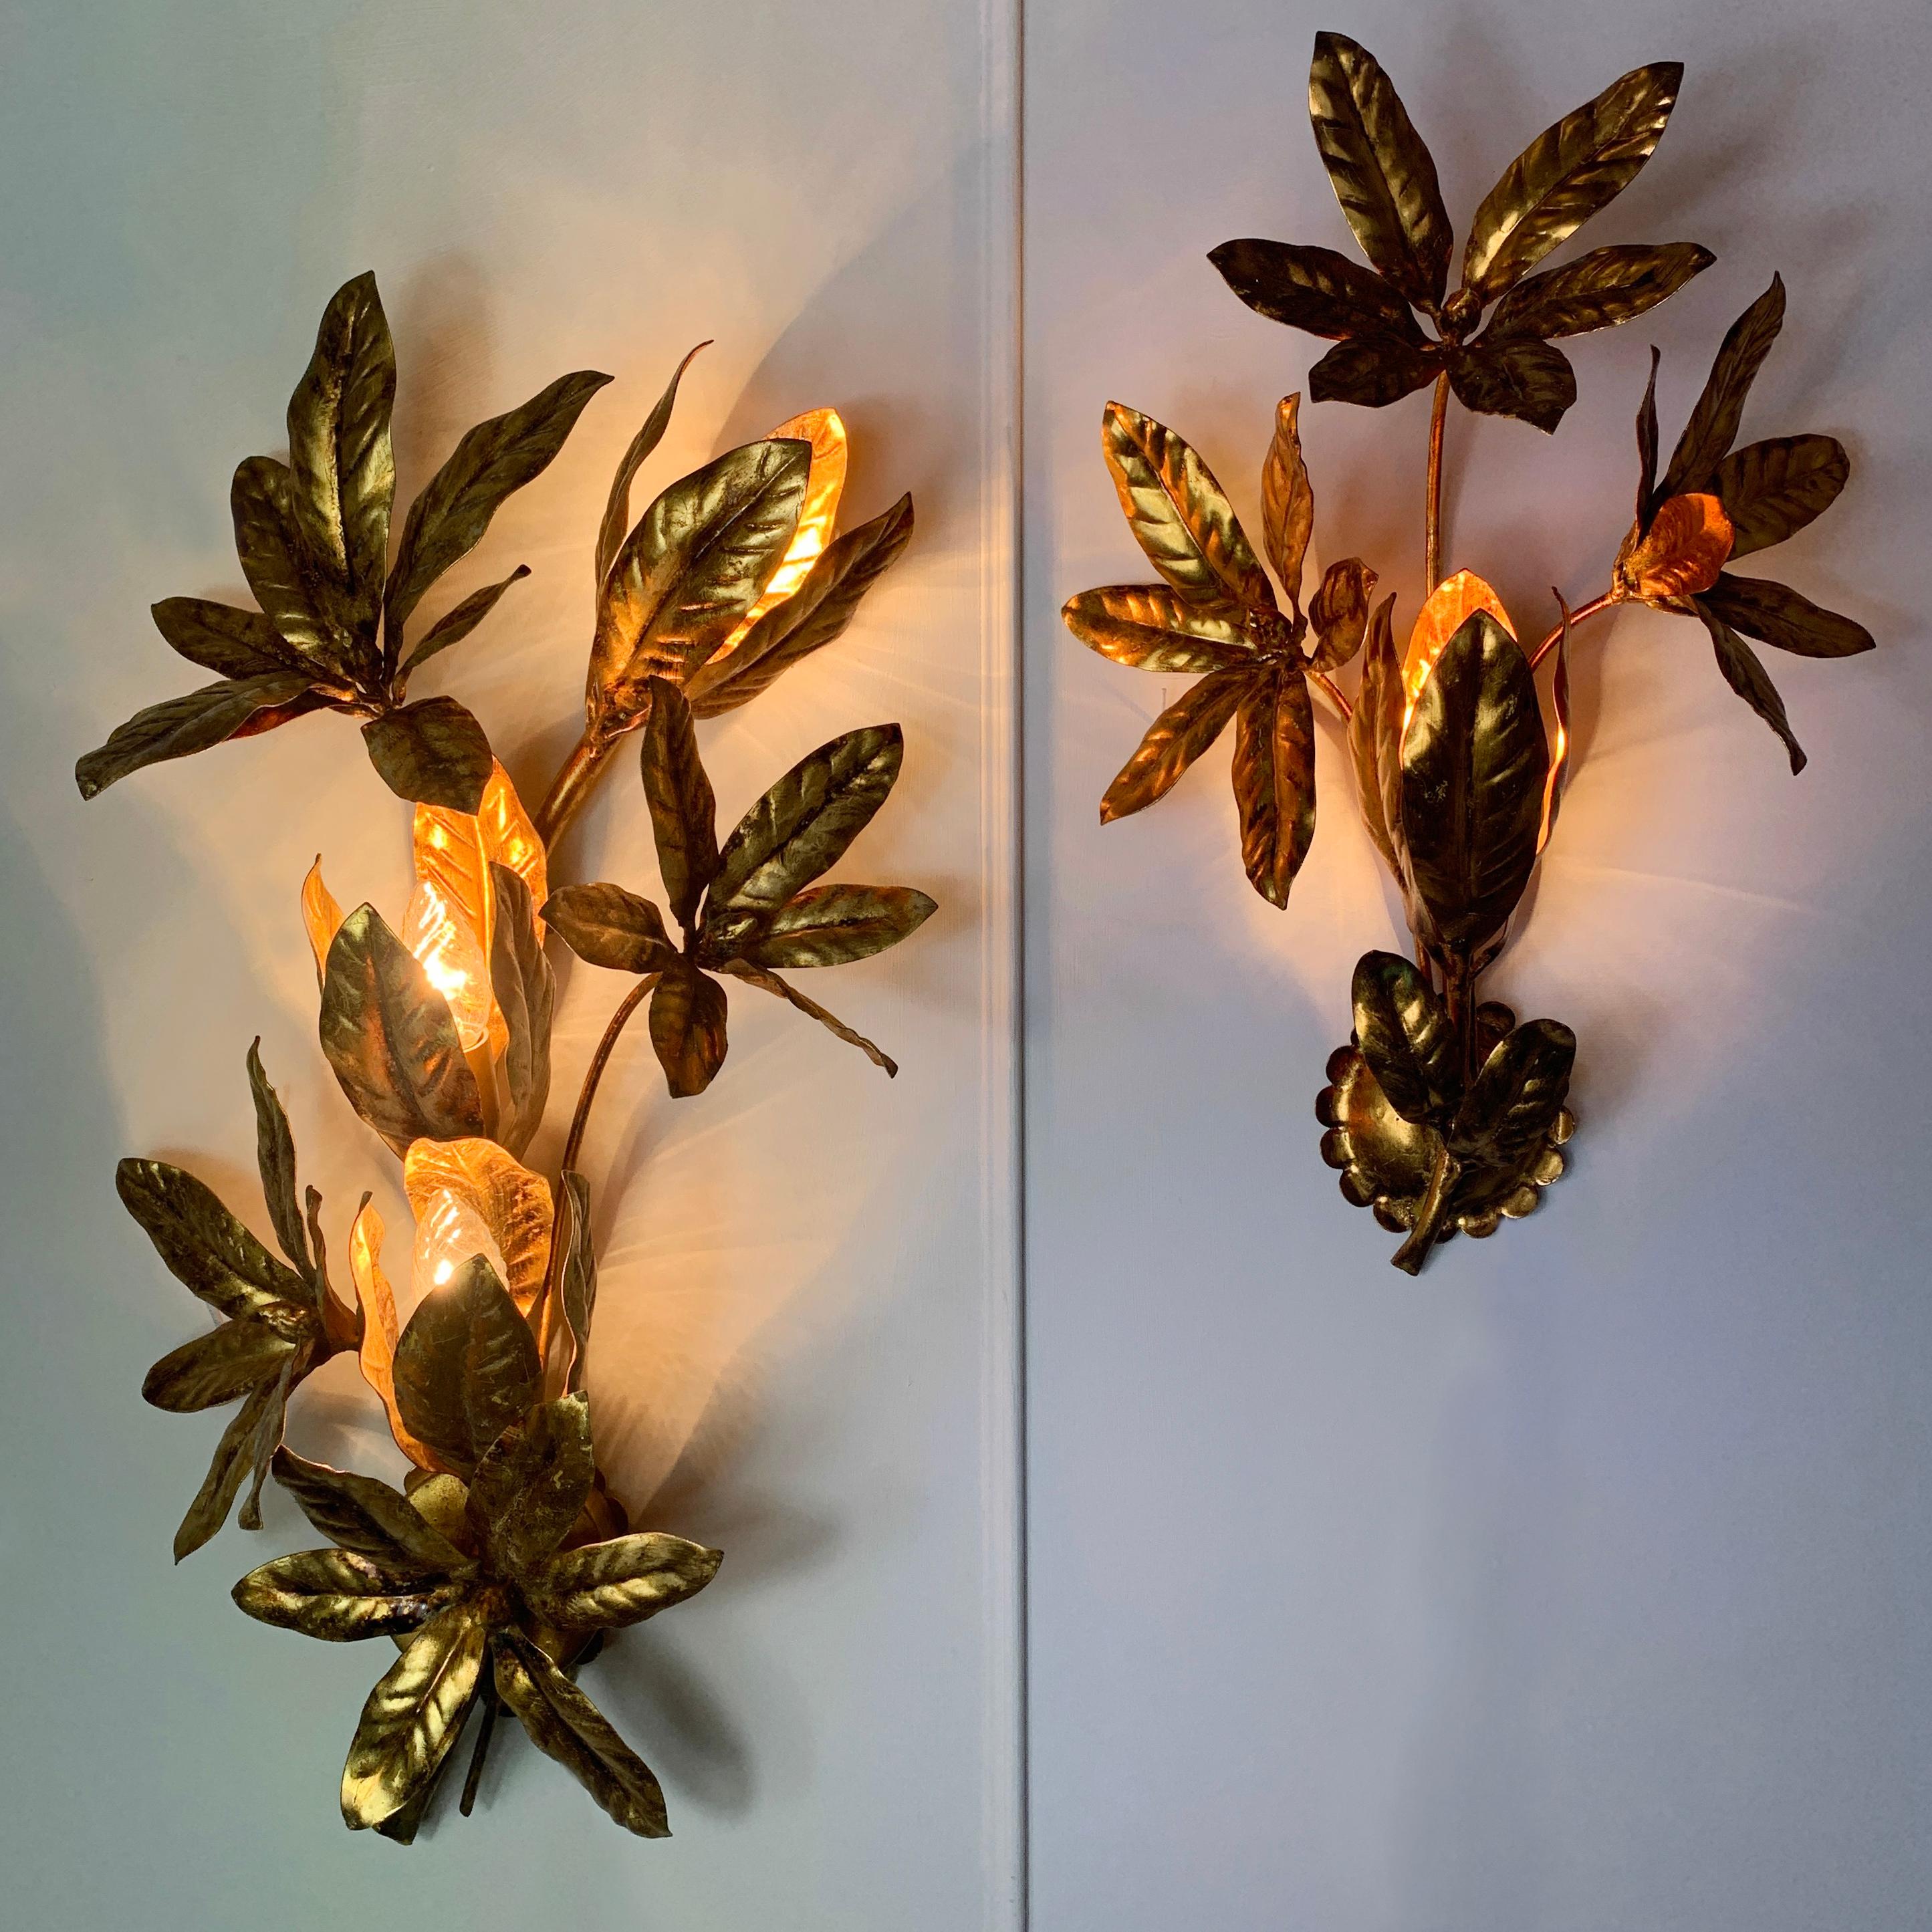 Fabulous gilt flower wall lights by 'Maison Flor Art', France, 1970s
One sconce with 3 large gilt flowers with single bulb holder hidden behind the leaves at the bottom
One sconce with 6 large gilt flowers with 3 bulb holders hidden behind the